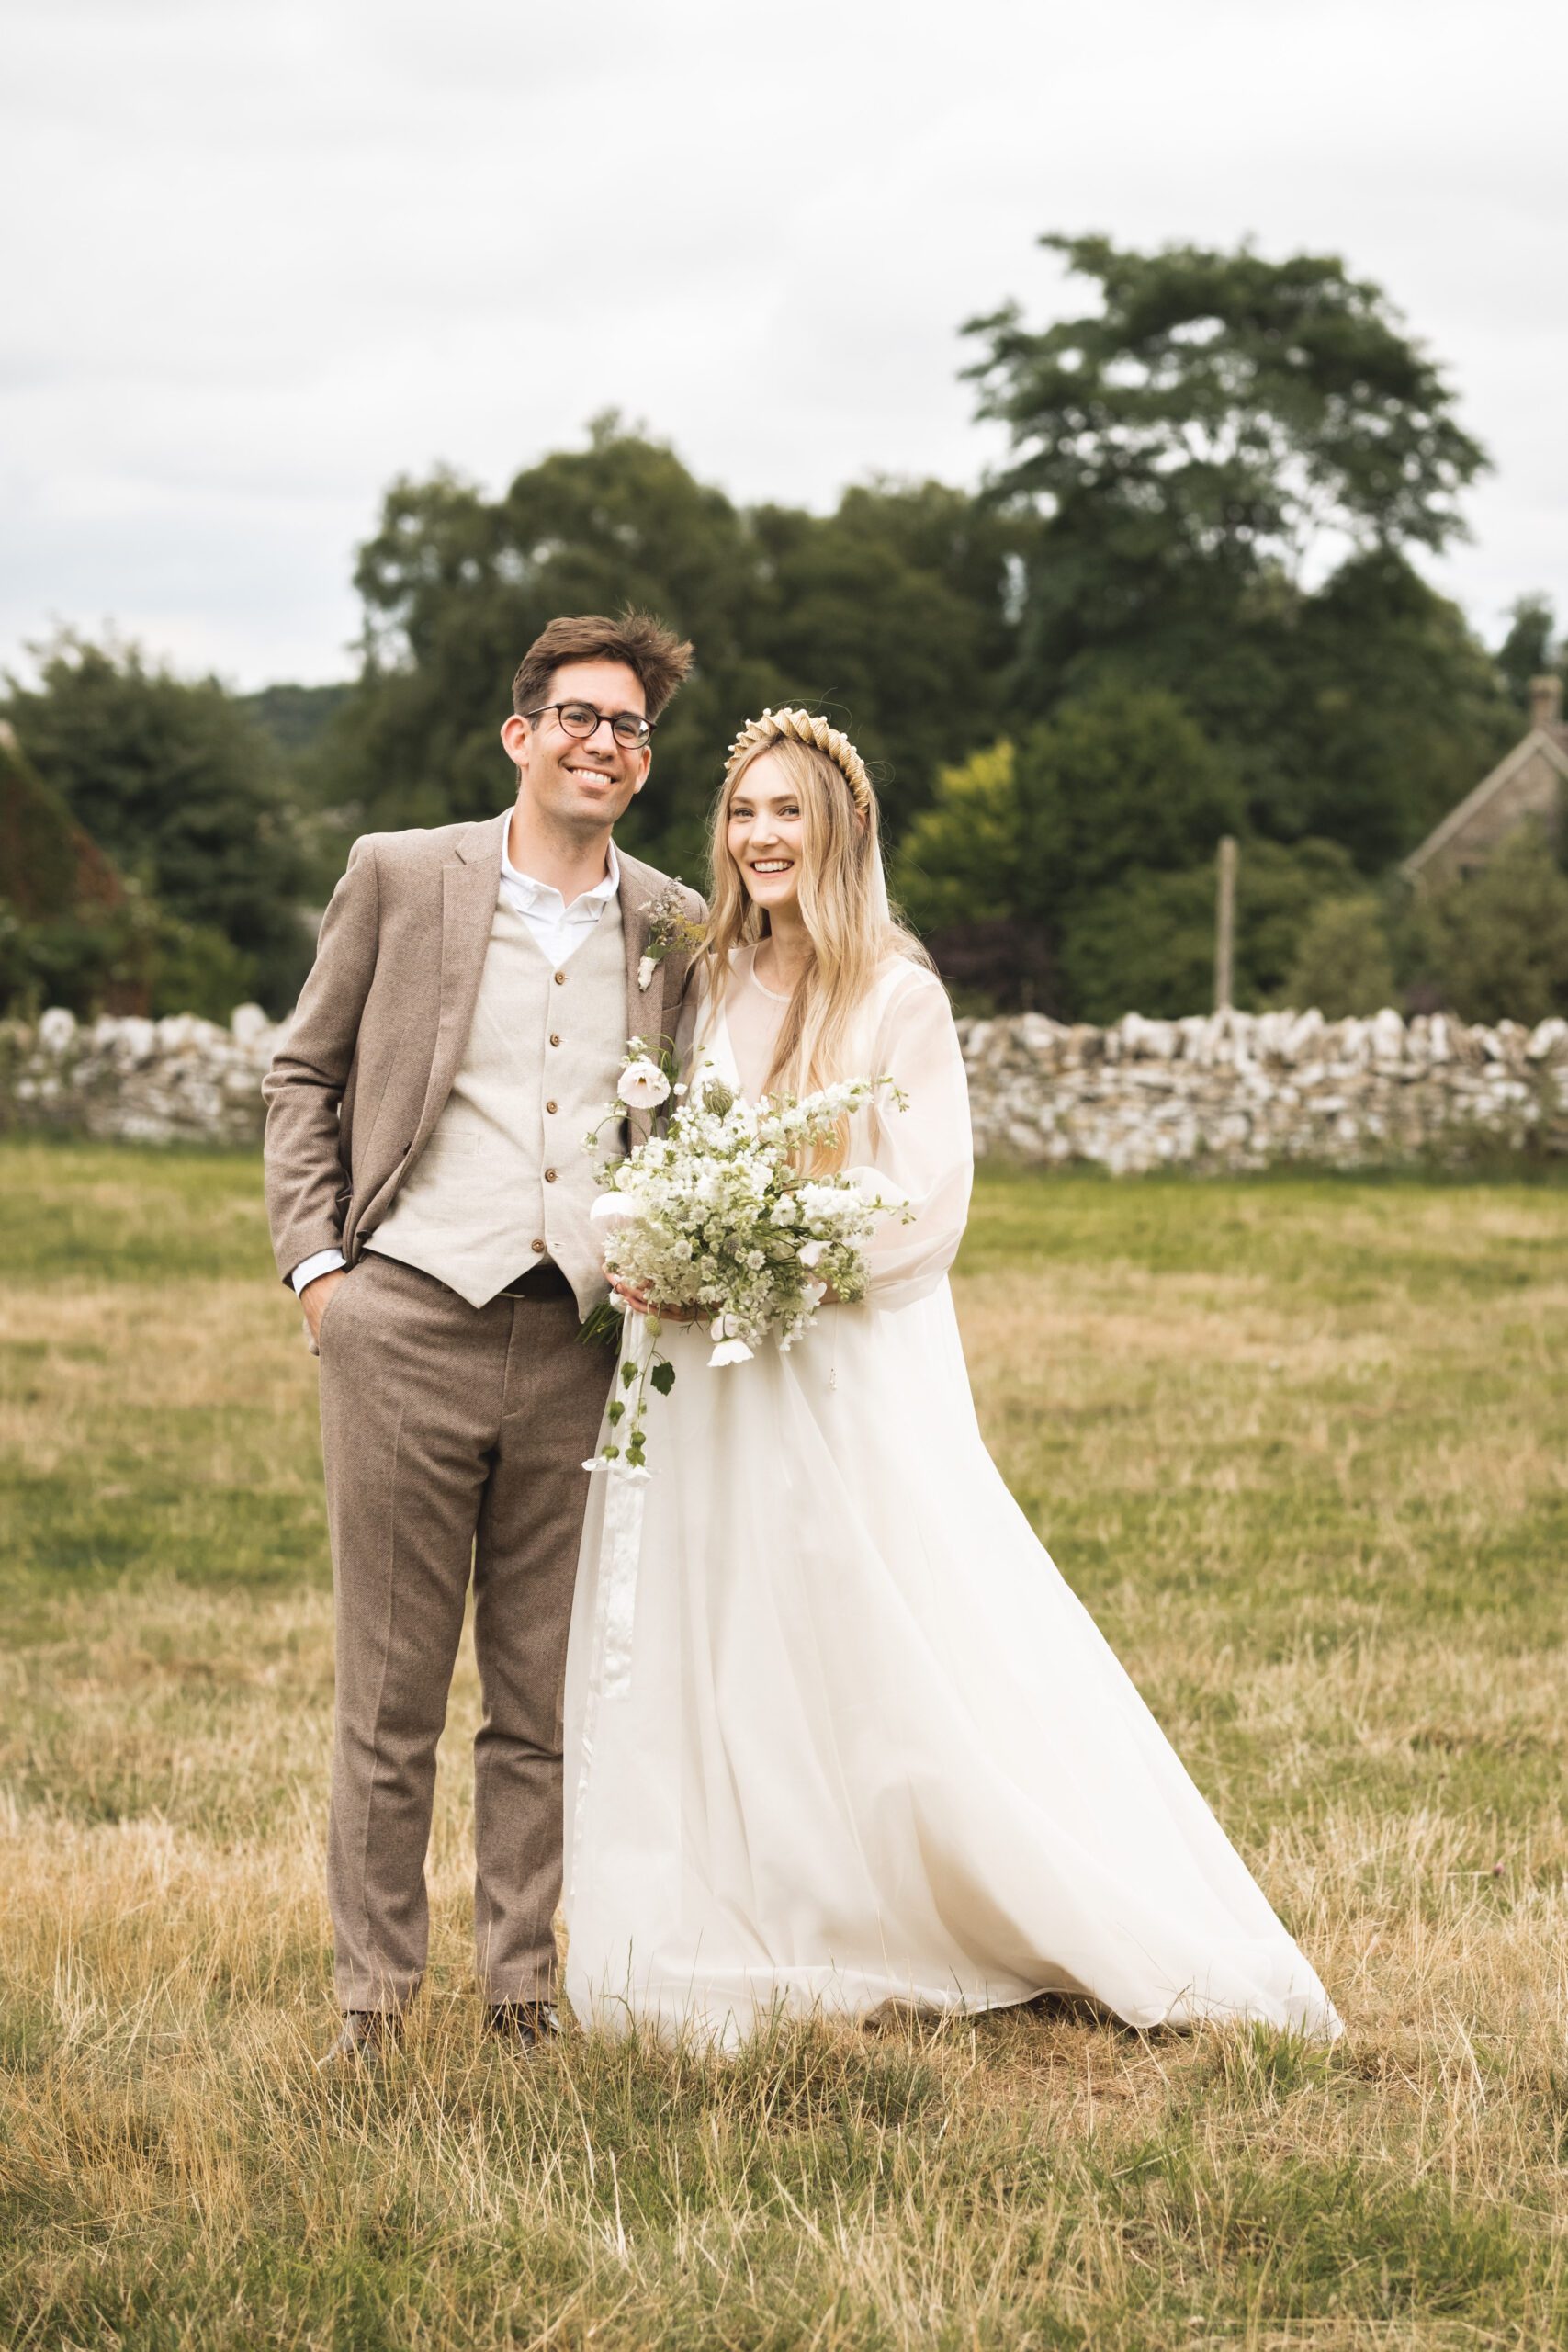 Natural wedding photography in the Cotswolds